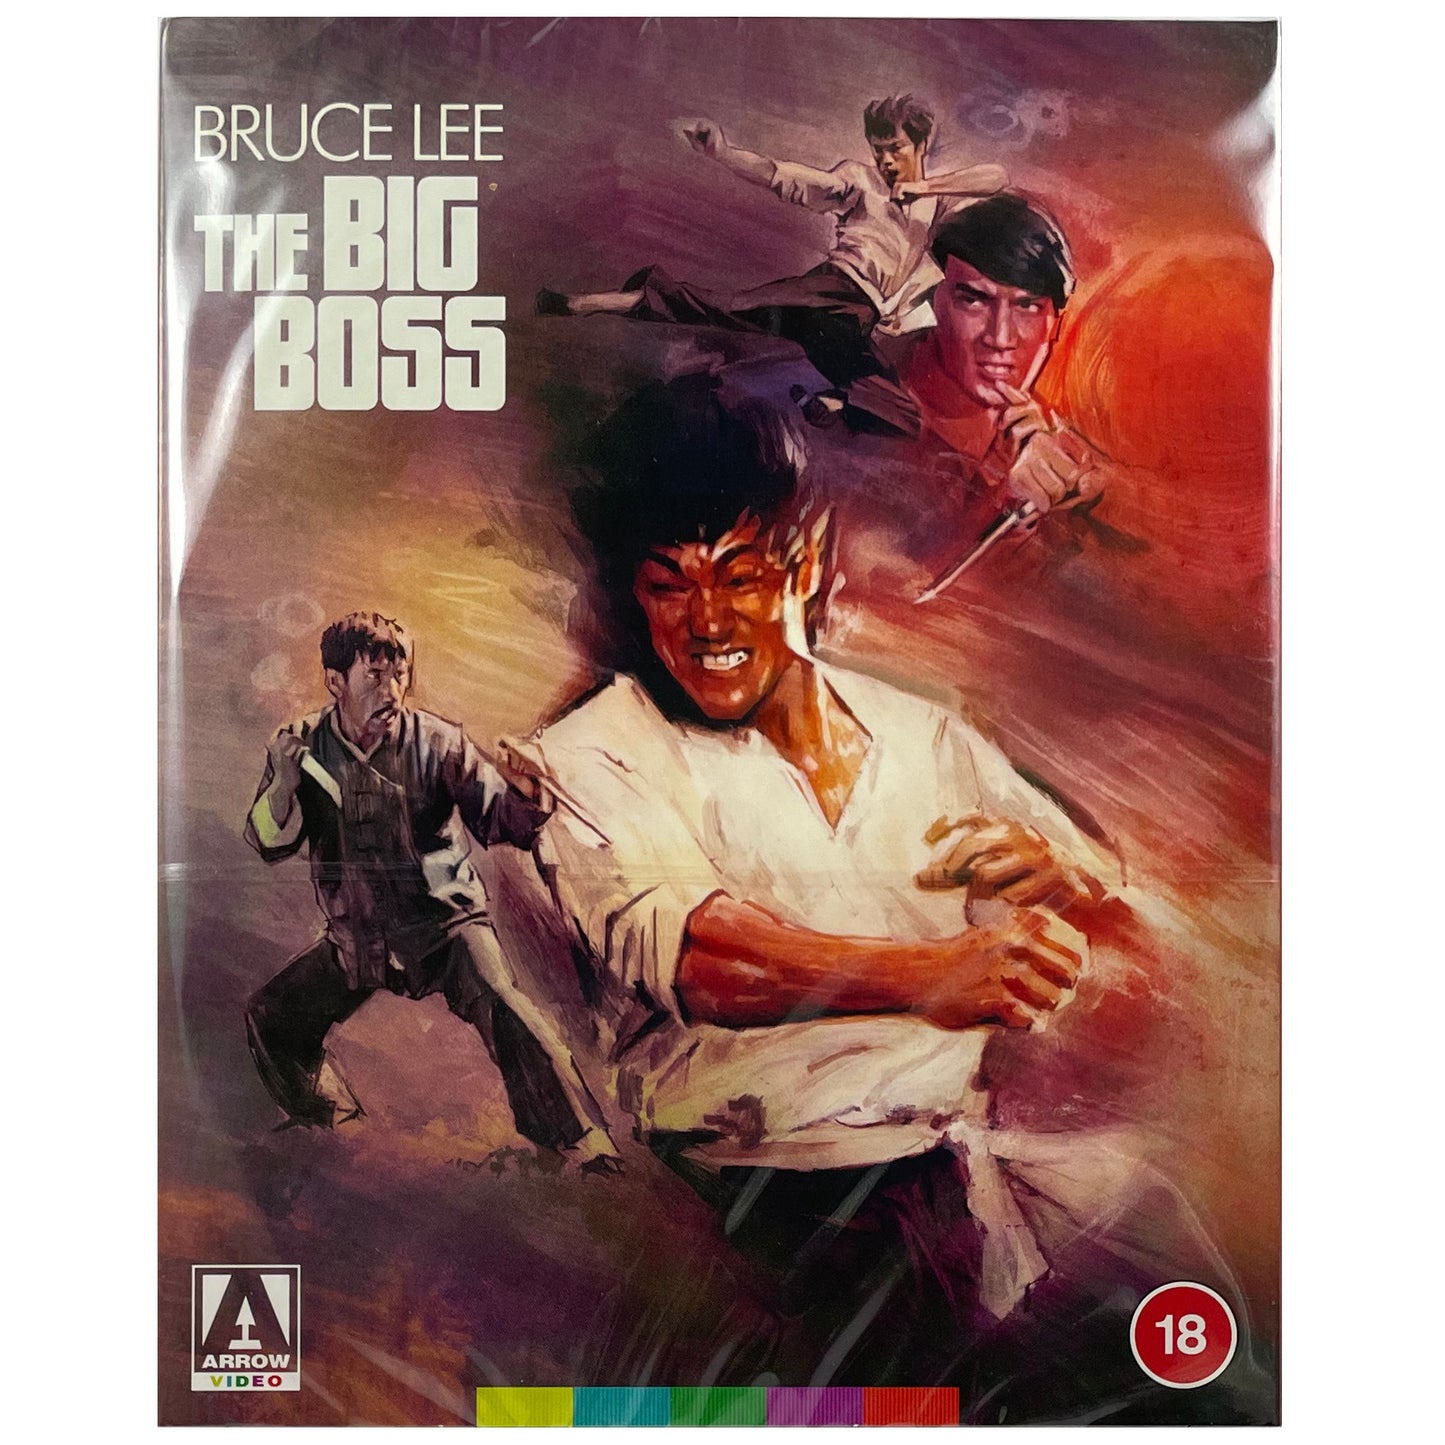 The Big Boss Blu-Ray - Limited Edition